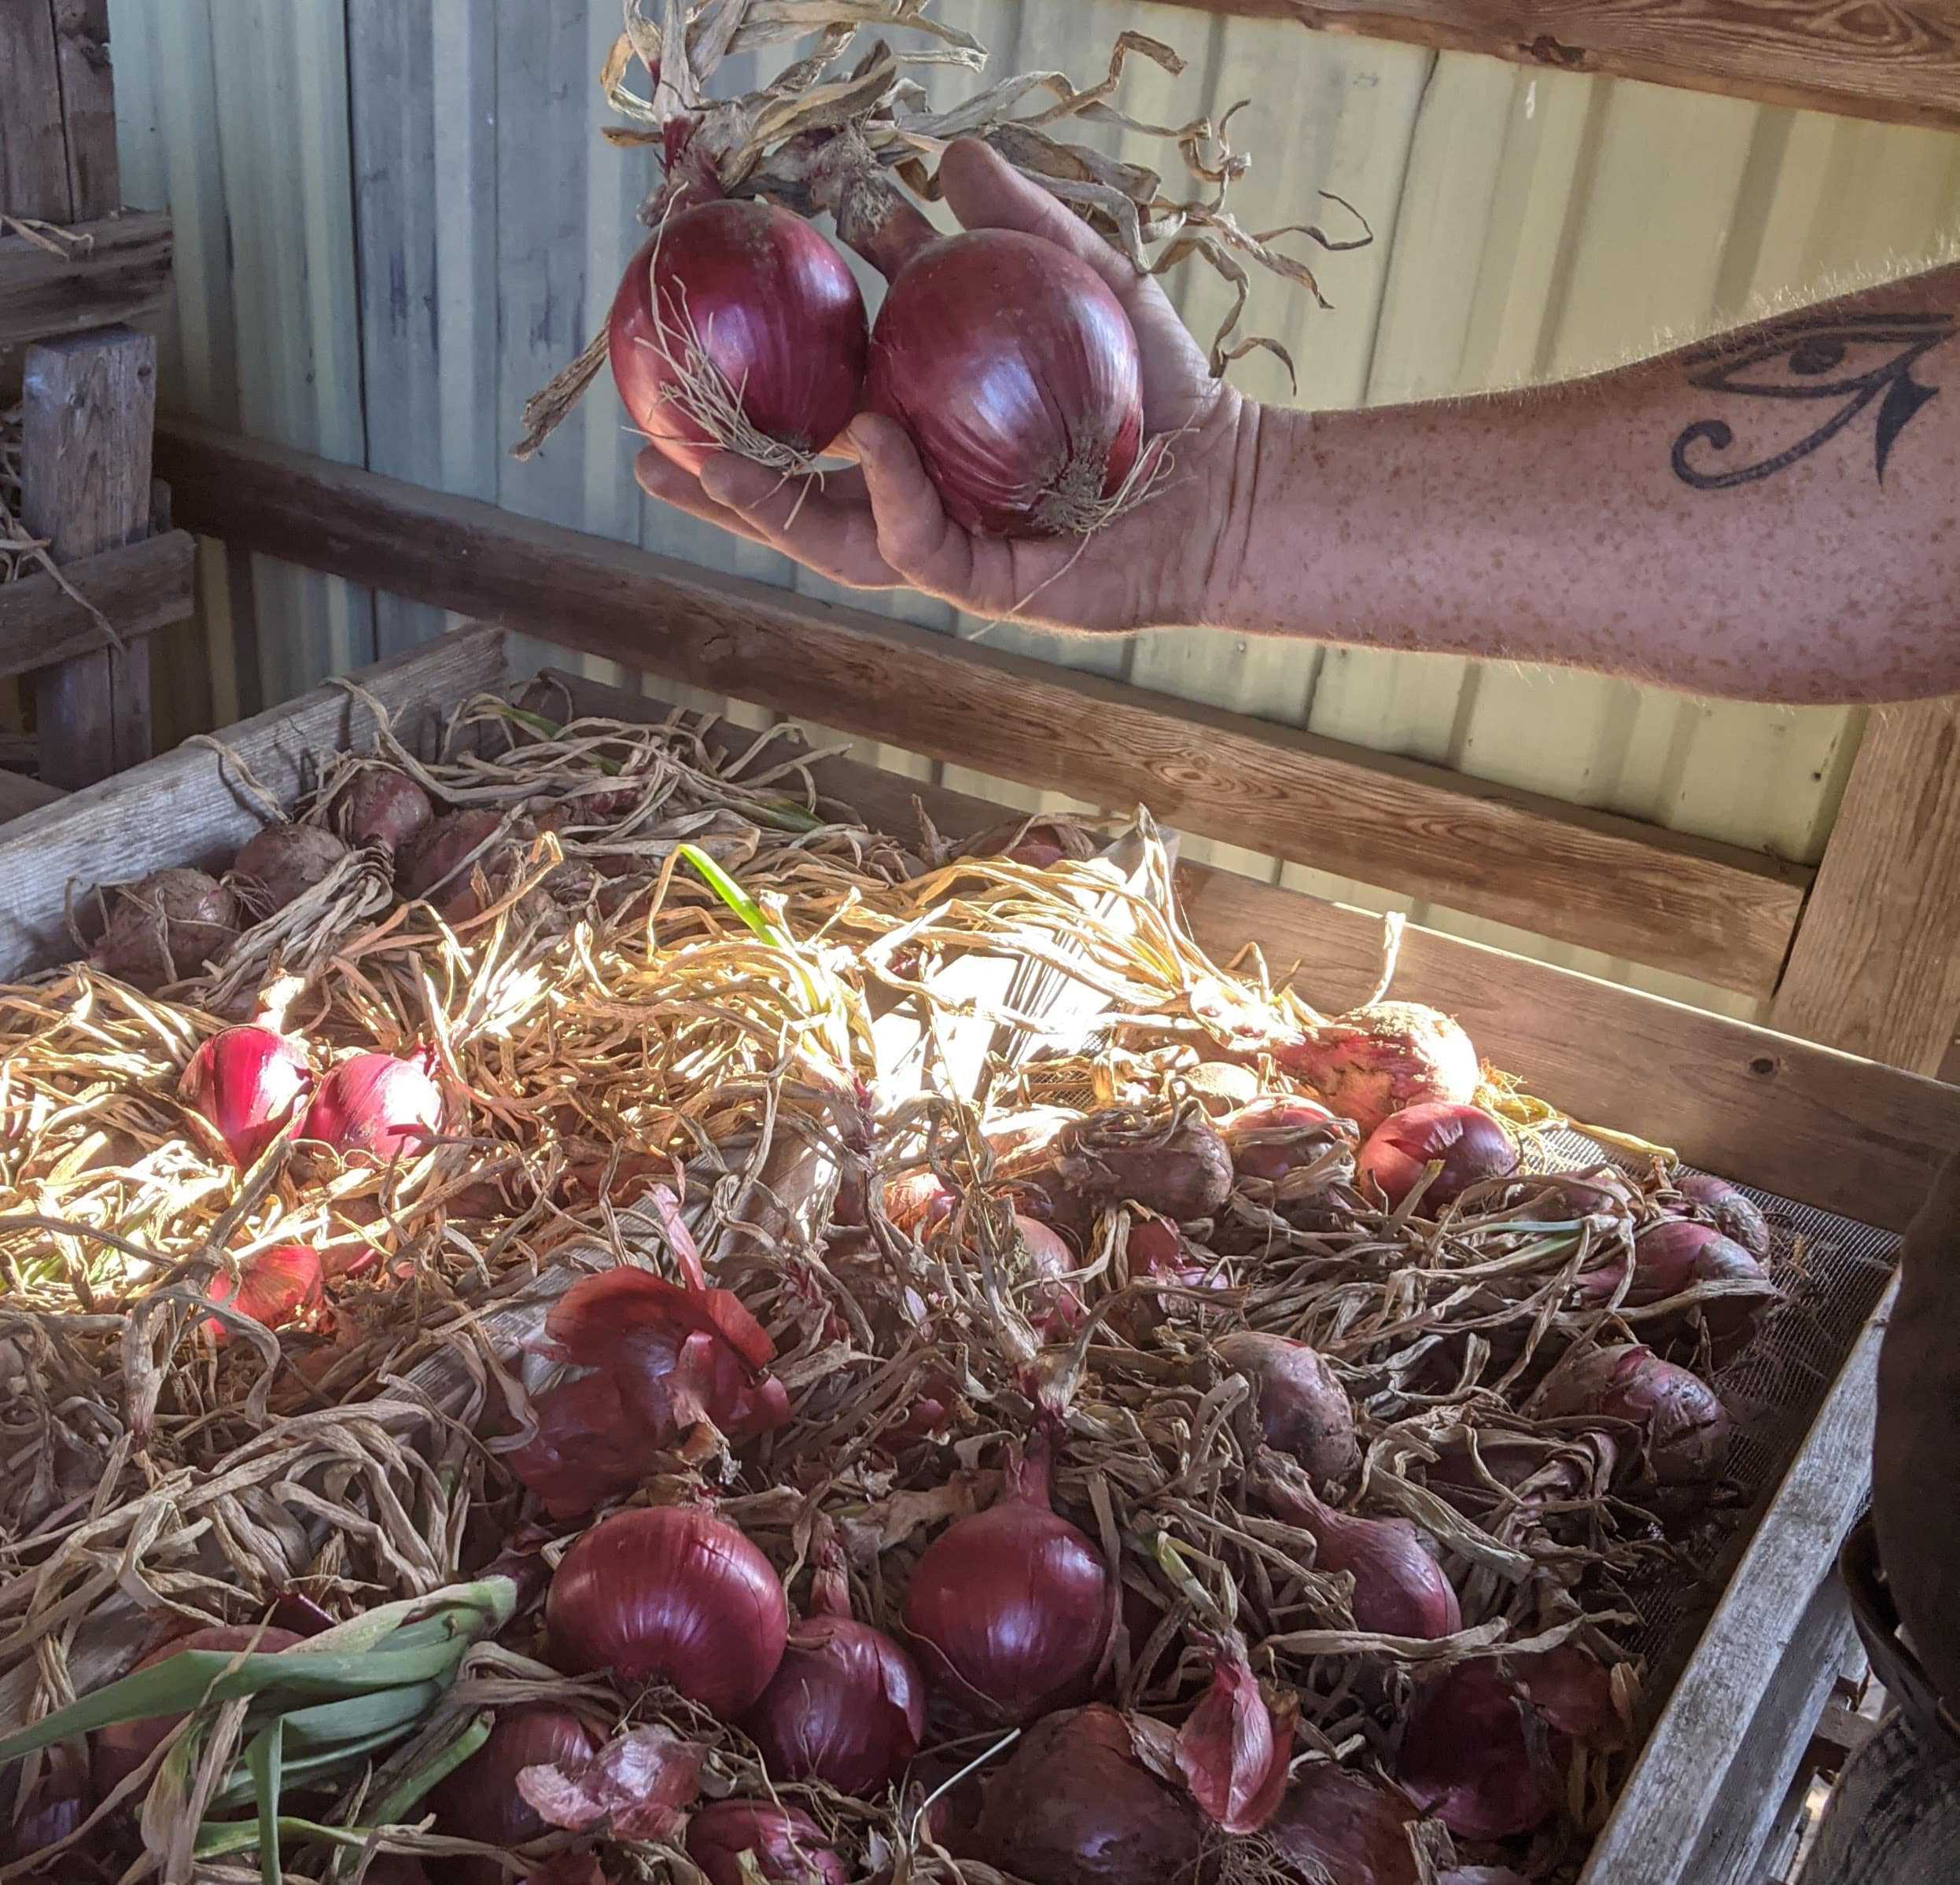 Red onions!